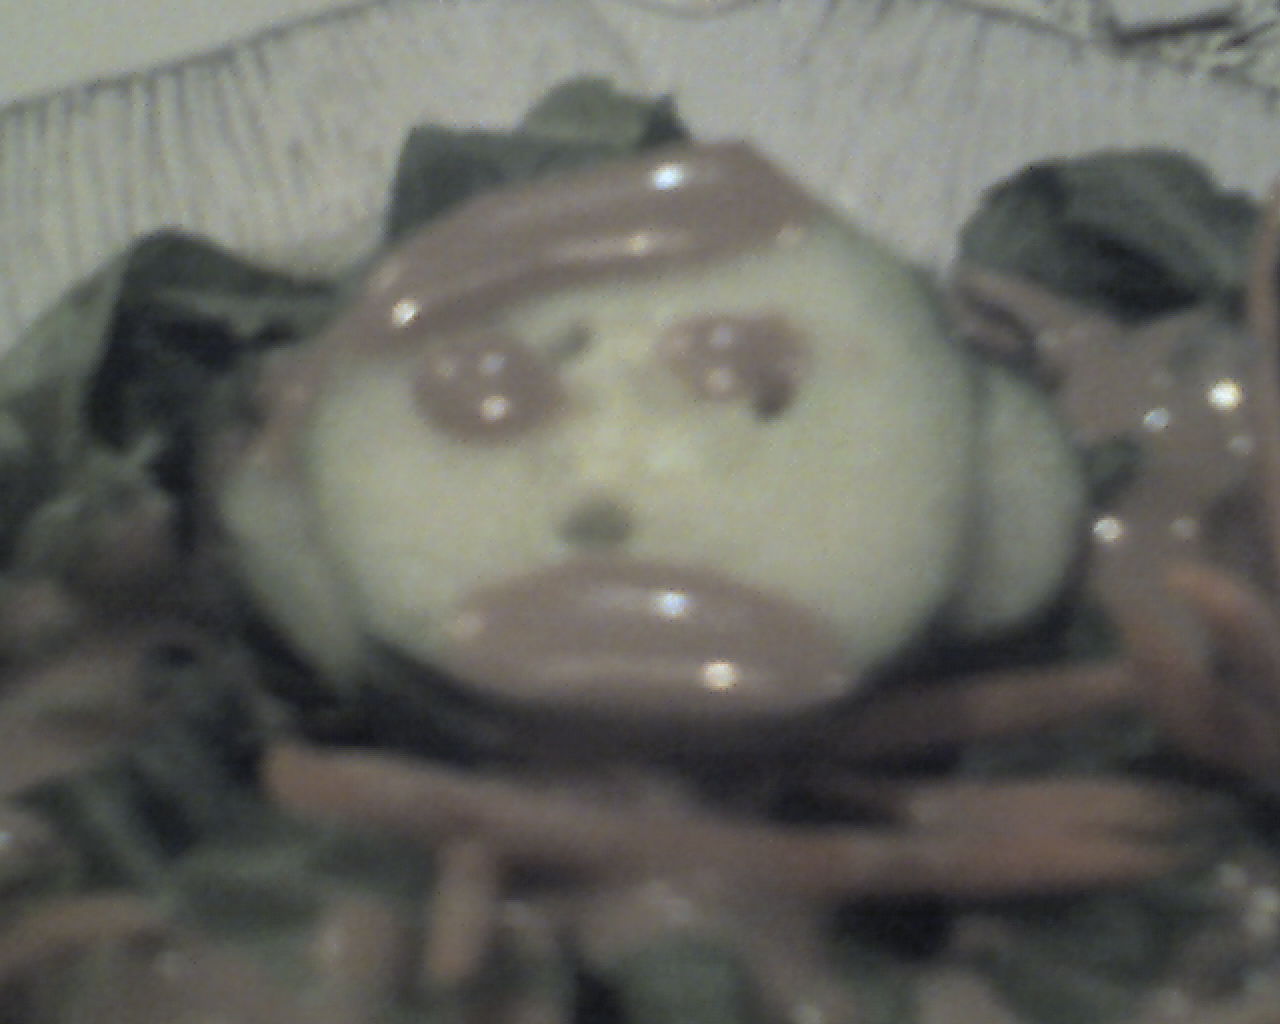 This is my salad after the French dressing. I looked down and Mr. Bill appeared.